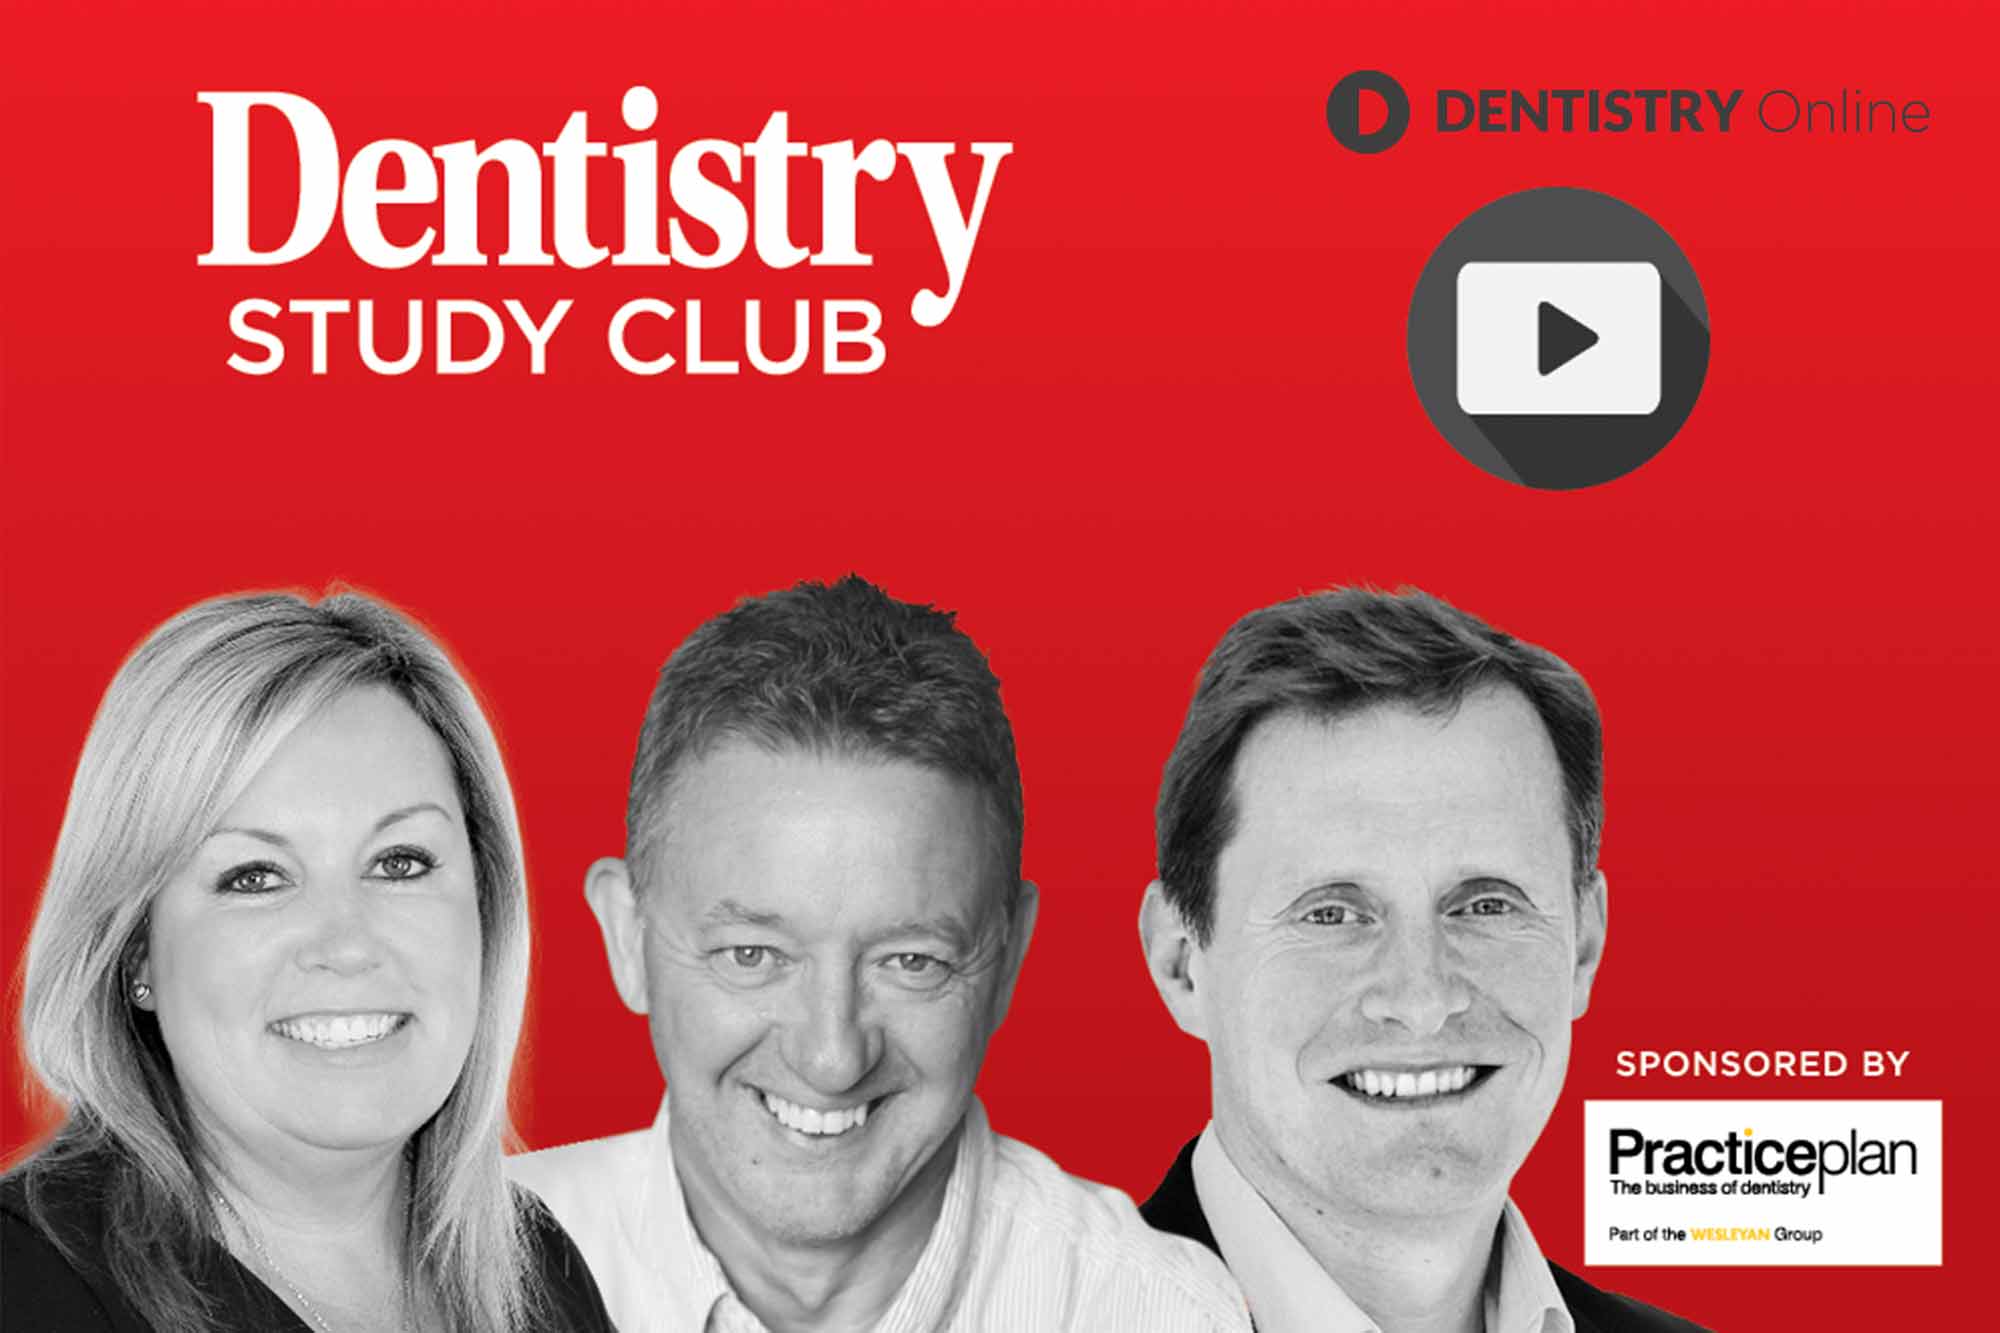 Join Zoe Close, Nigel Jones and Les Jones for a free webinar exploring the conversion to private dentistry on Tuesday 6 October at 19:00